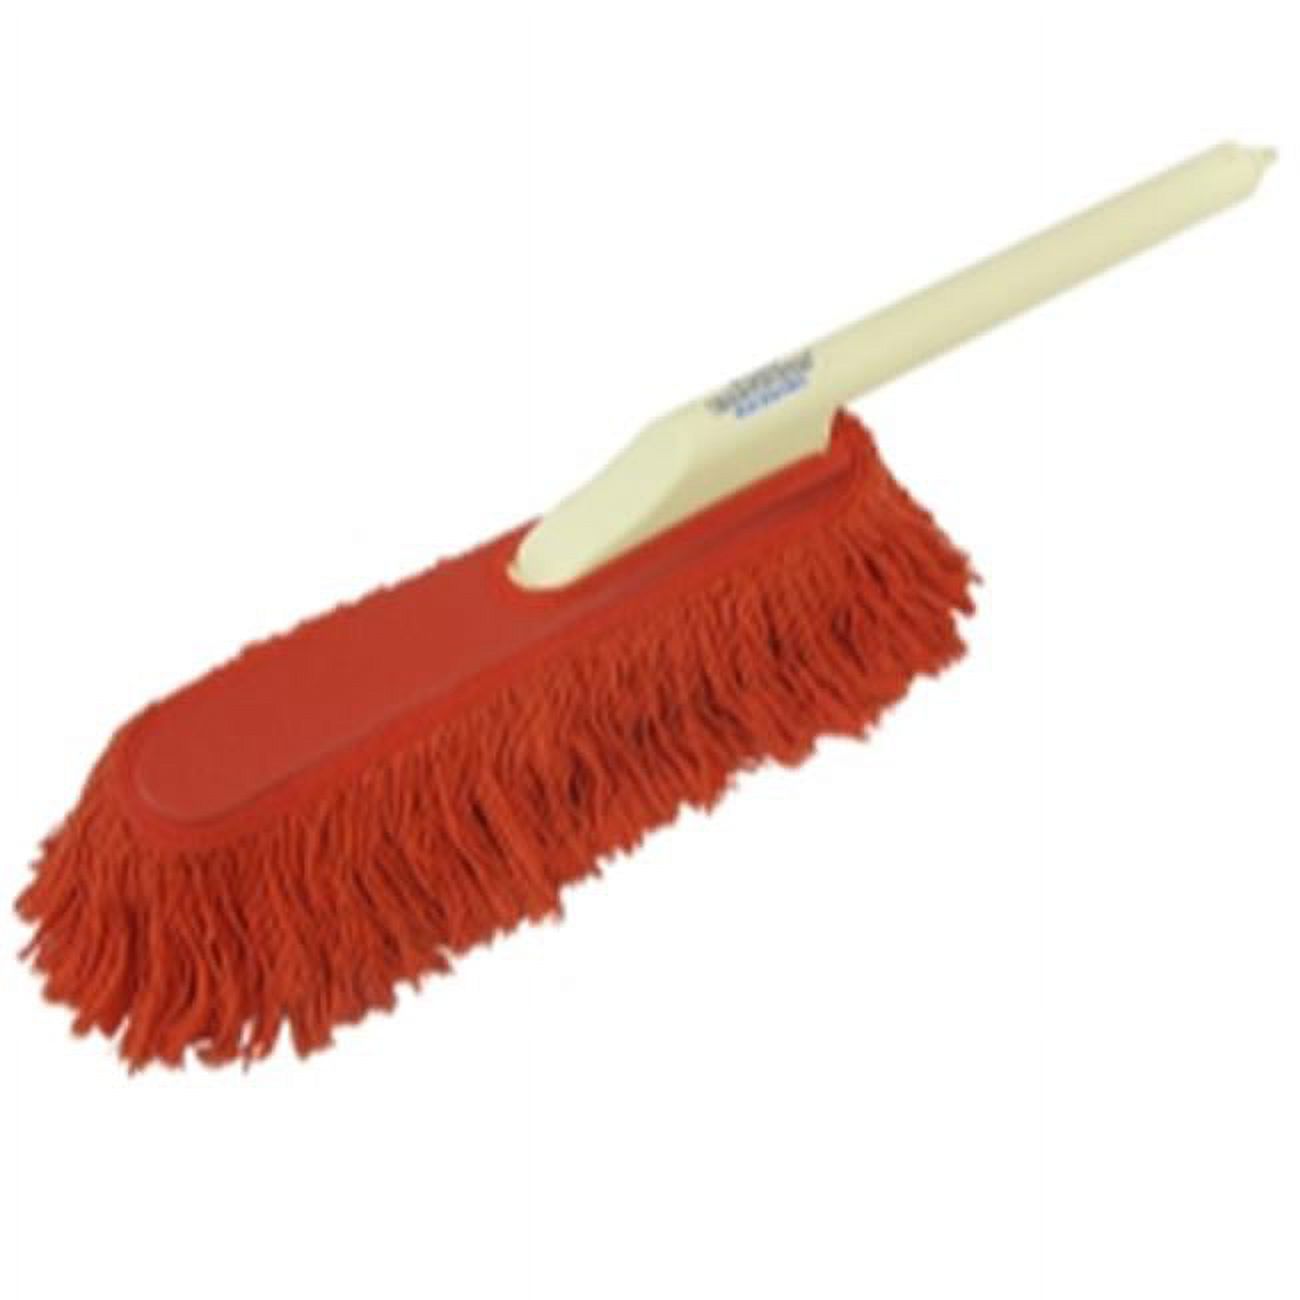 California Car Duster with Plastic Handle and Wax Treated Cotton Mop Removes Auto Dust Scratch Free (Colors May Vary) - image 1 of 4